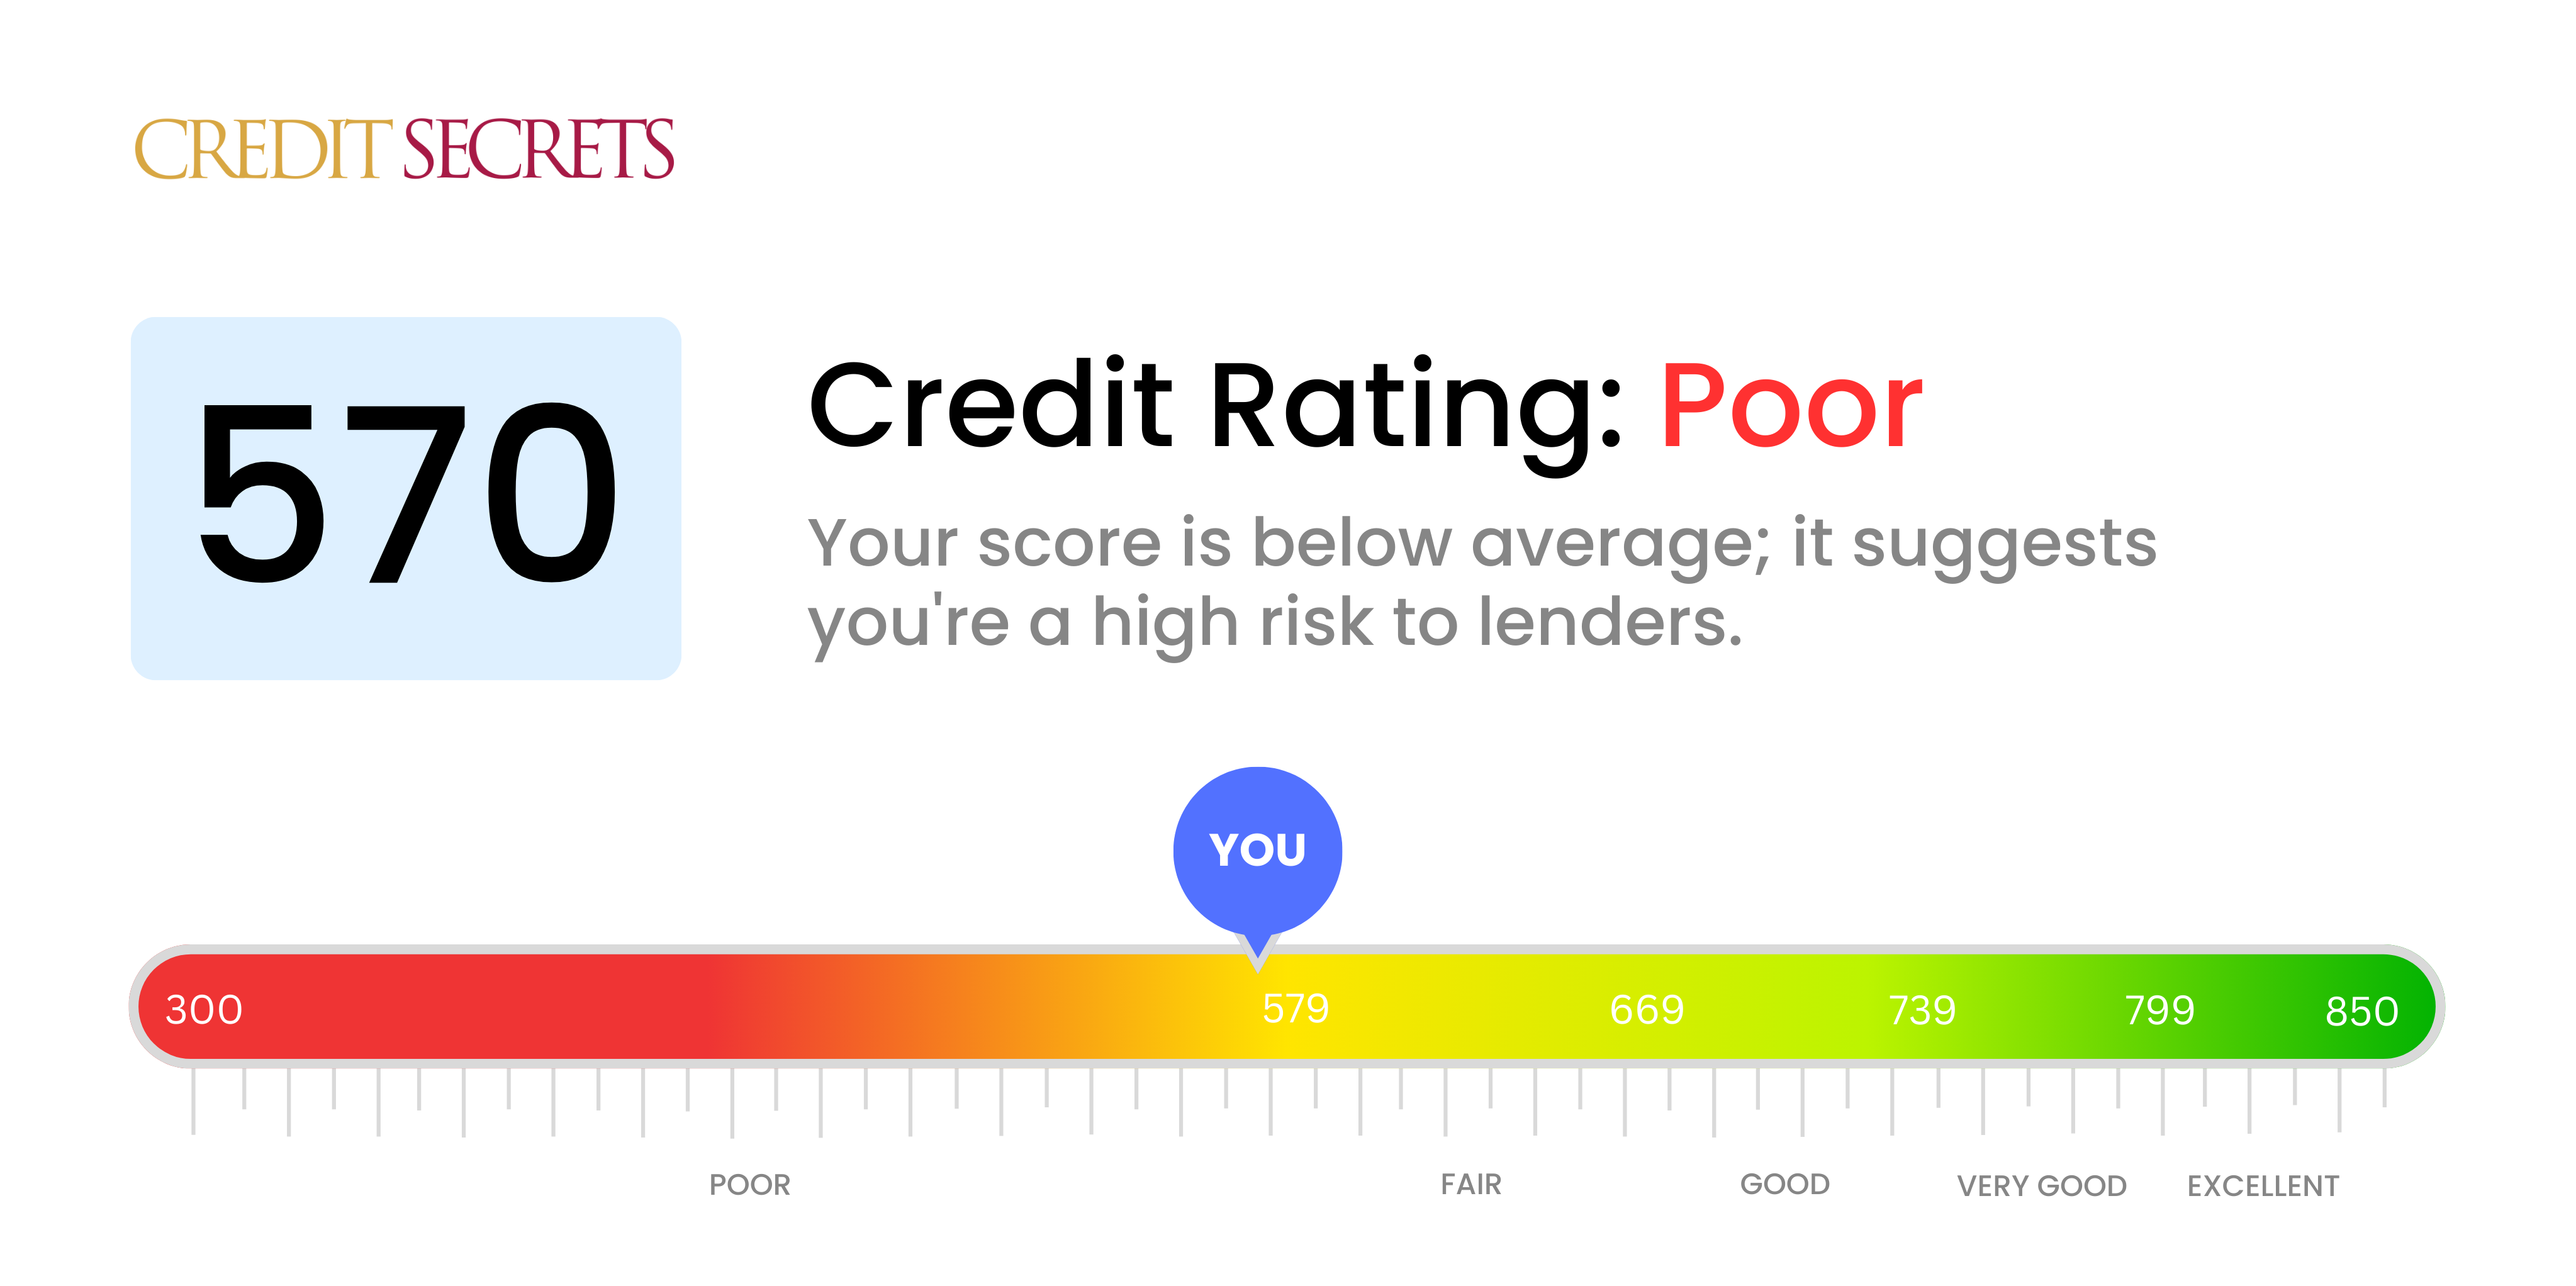 Is 570 a good credit score?